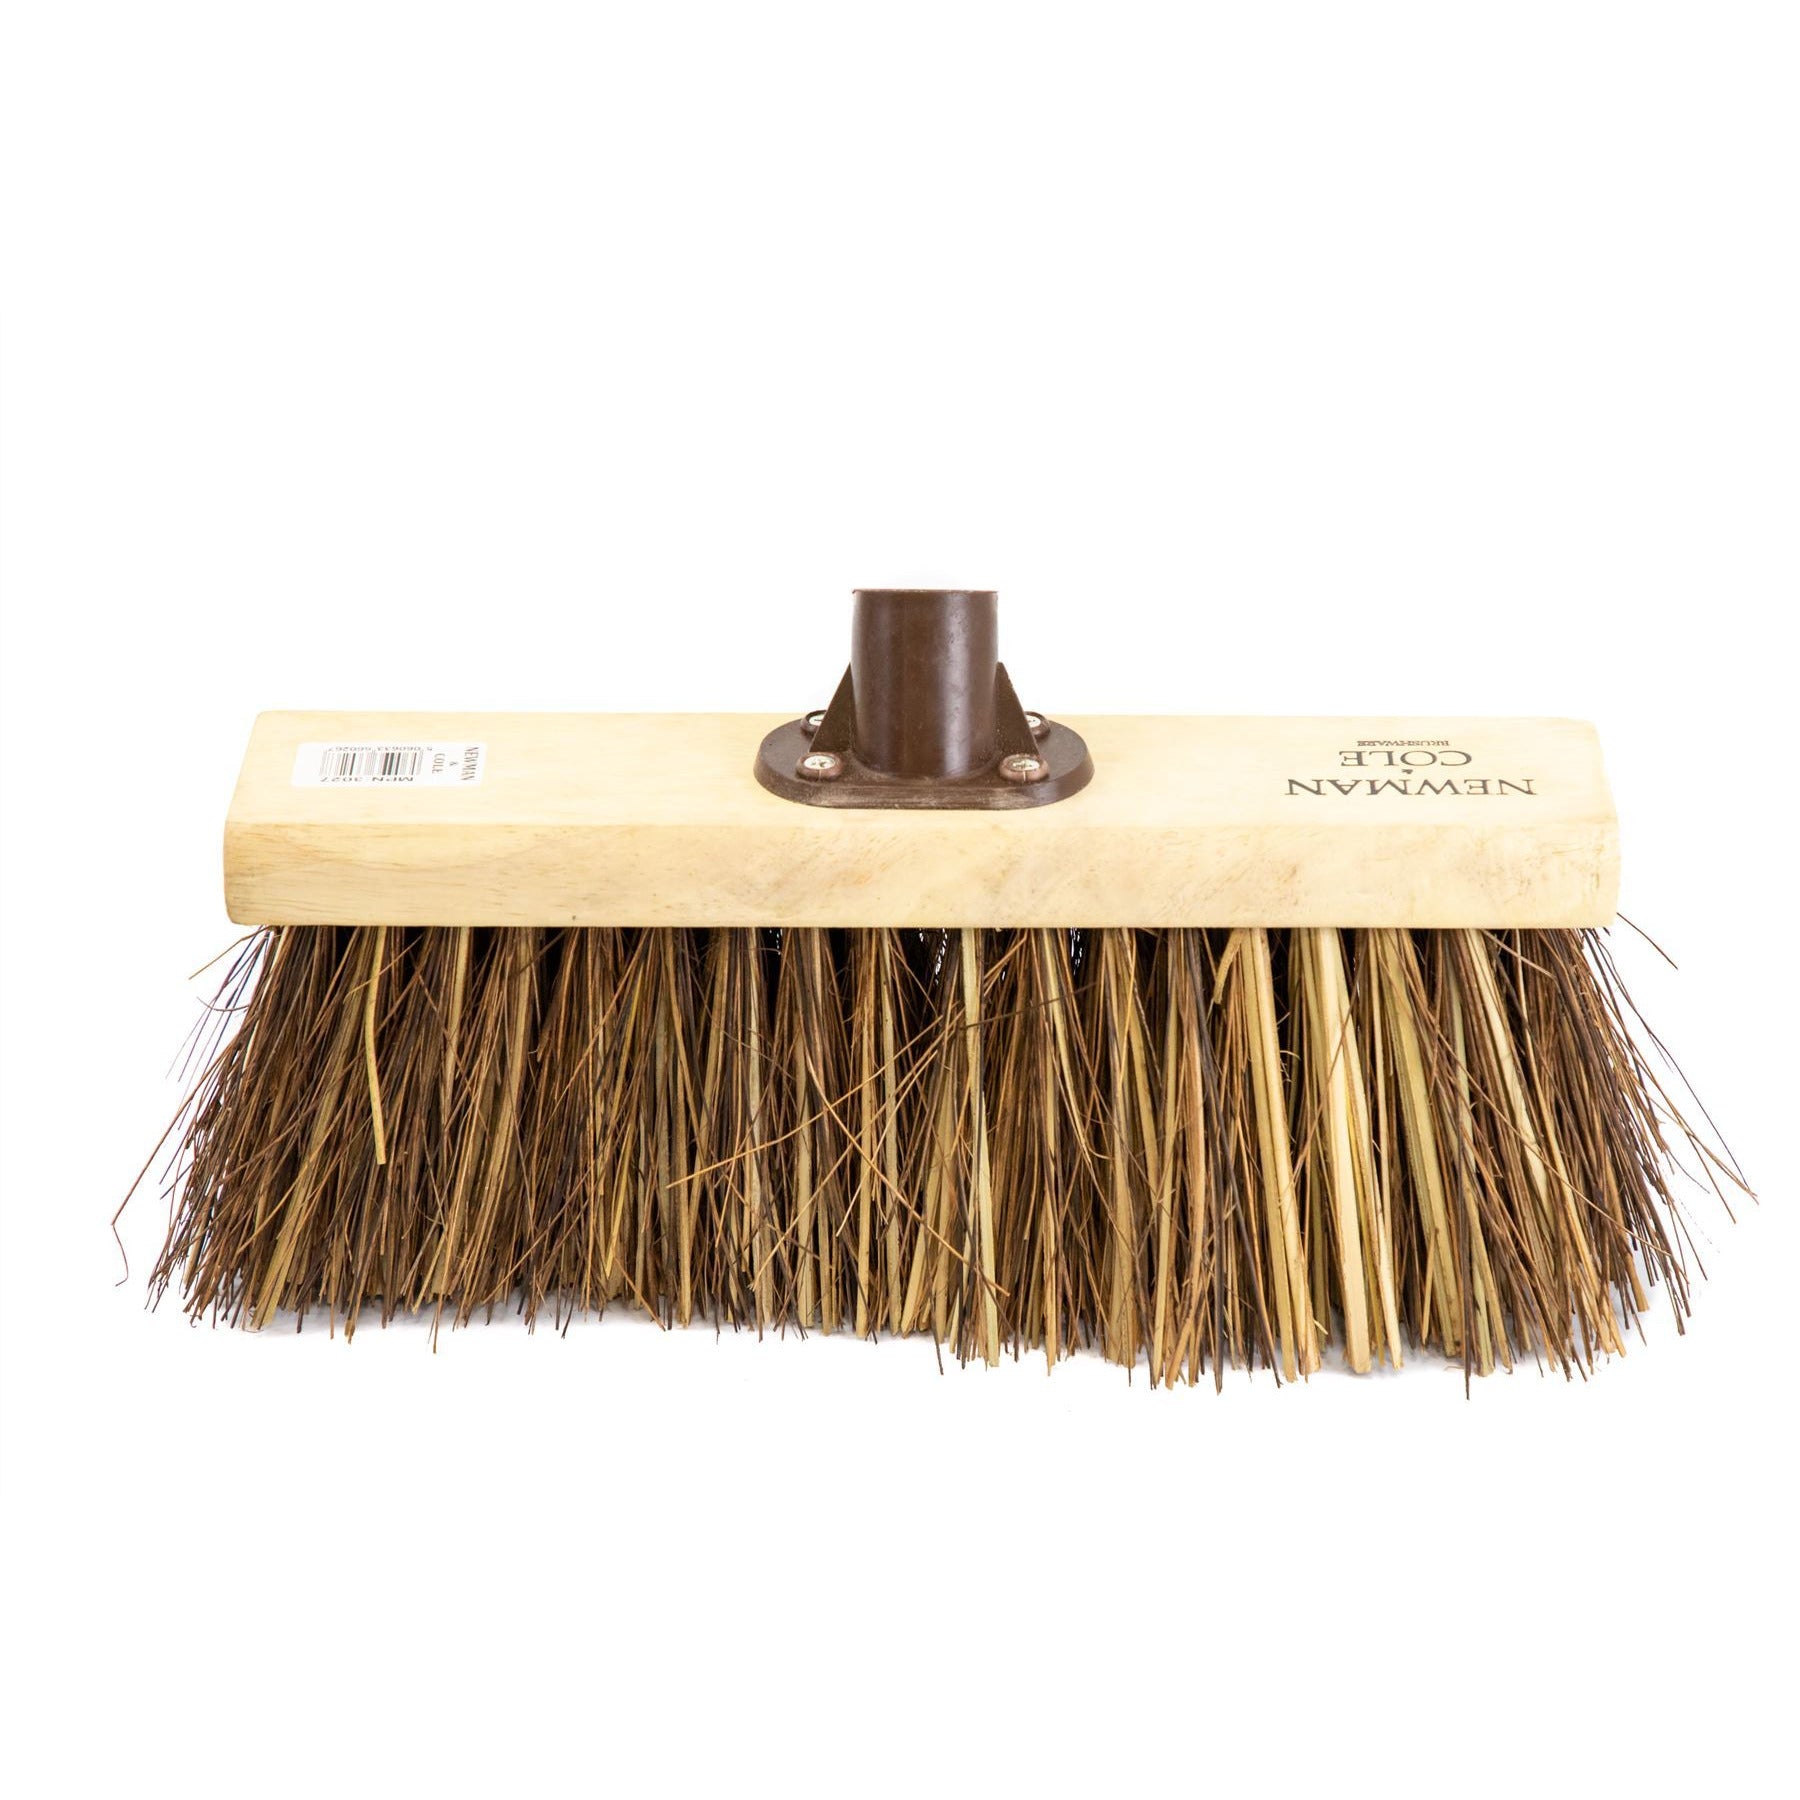 Newman and Cole 13" Bass & Cane Flat Broom Head with Plastic Socket - The Dustpan and Brush Store